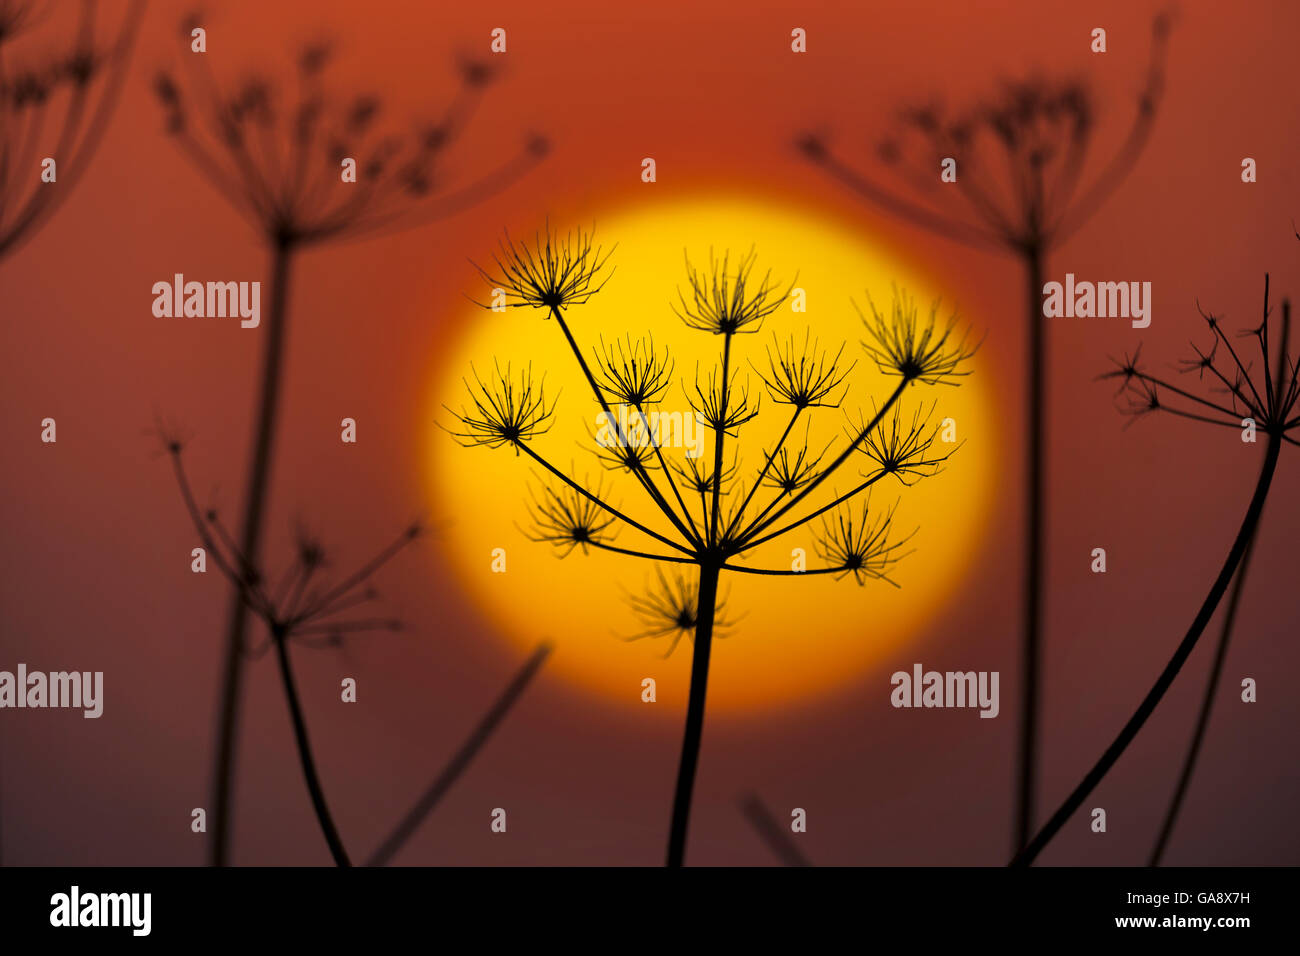 Hedge parsley (Torilis japonica) at sunset, silhouetted against sun, England, January. Stock Photo